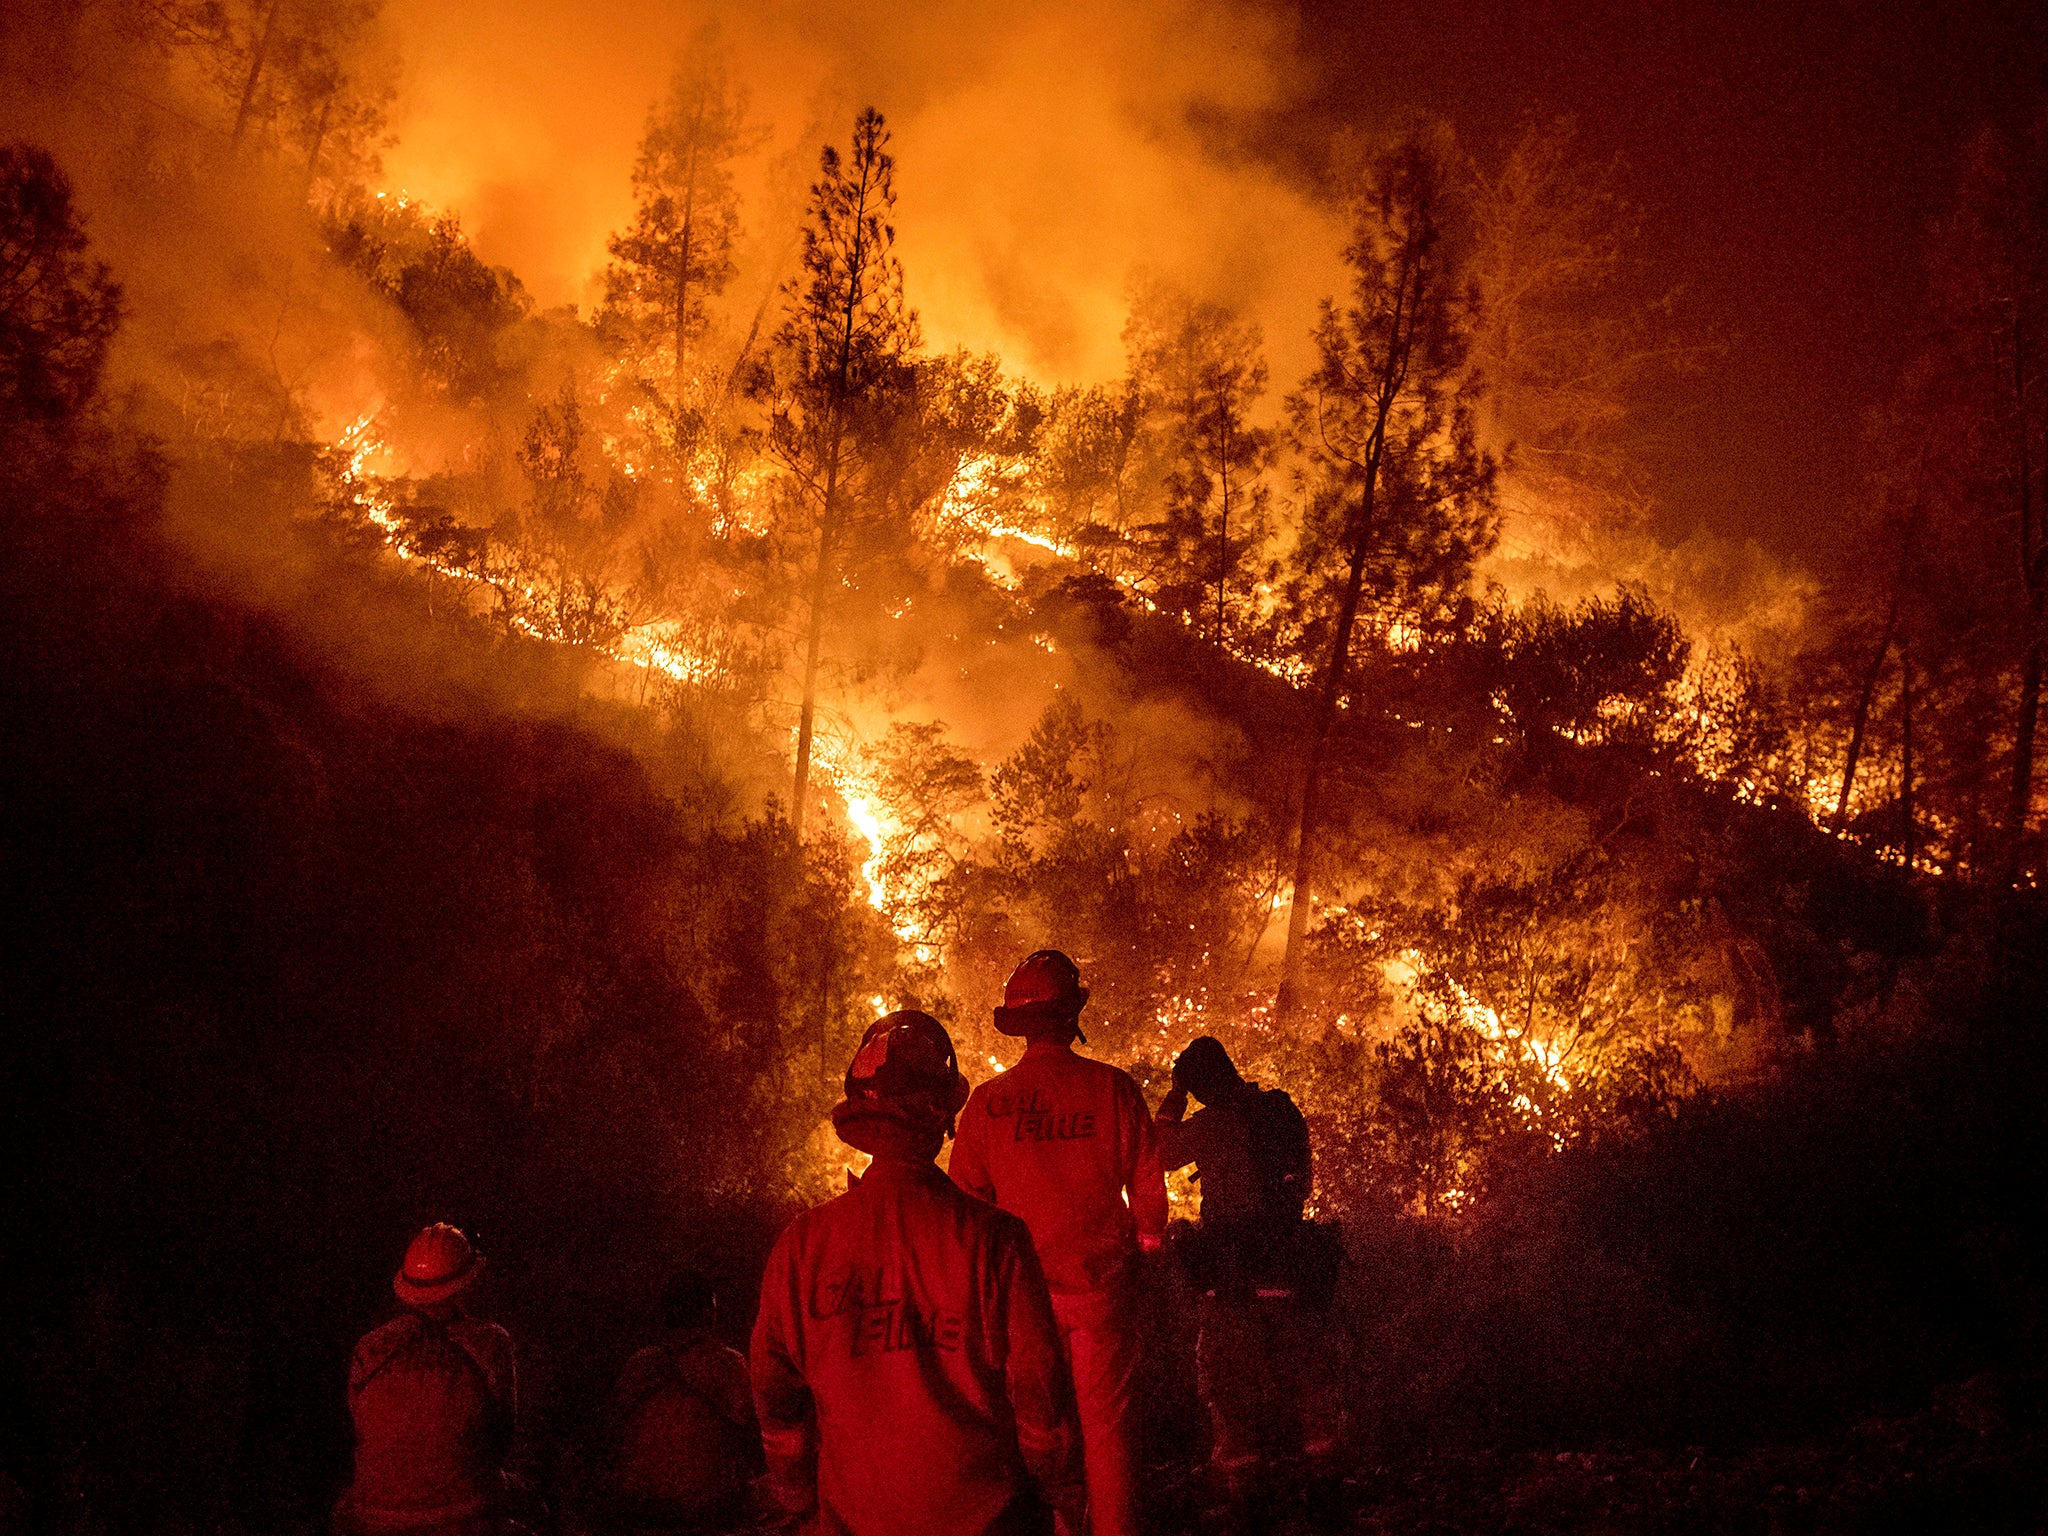 Wildfires that have struck from California to Greece this year have been attributed partly to a warming climate